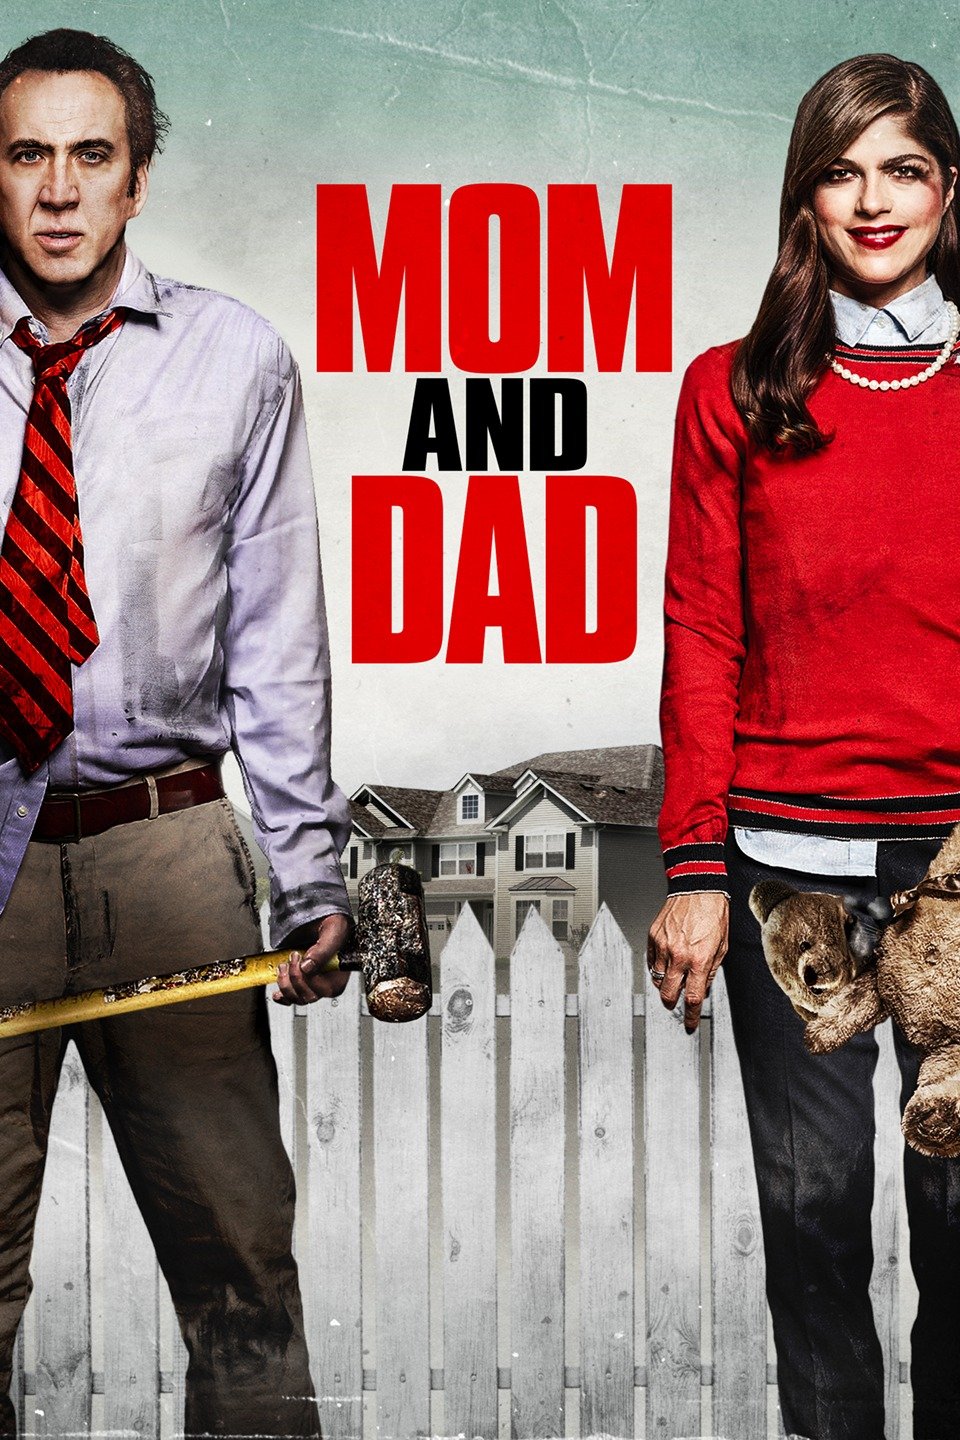 Son Blackmail Momxnxxx - Mom and Dad - Rotten Tomatoes